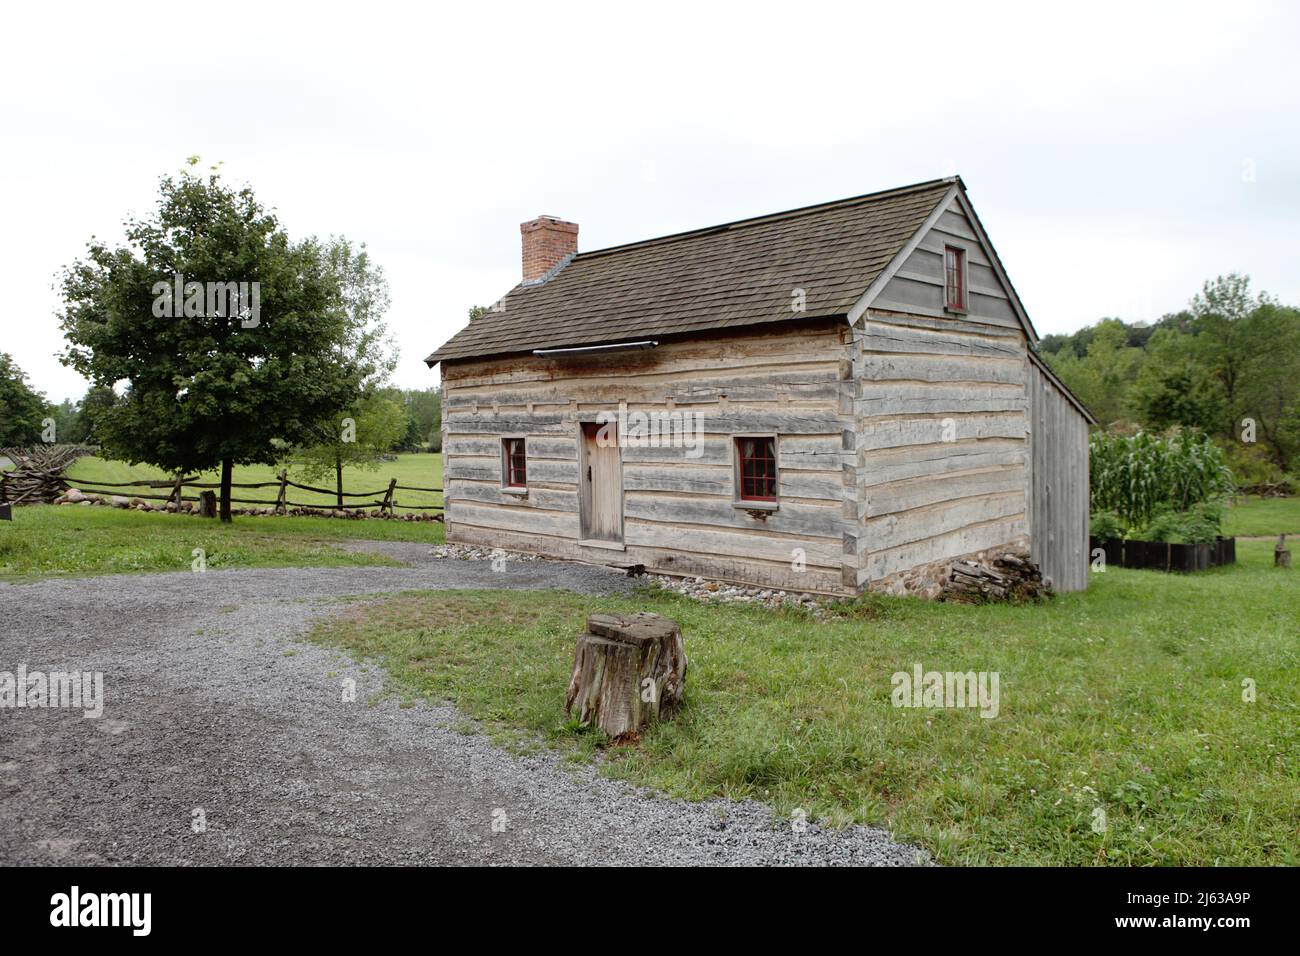 The Joseph Smith Boyhood home in Palmyra New York.  A log house constructed from local hardwoods, using dovetail construction. Stock Photo